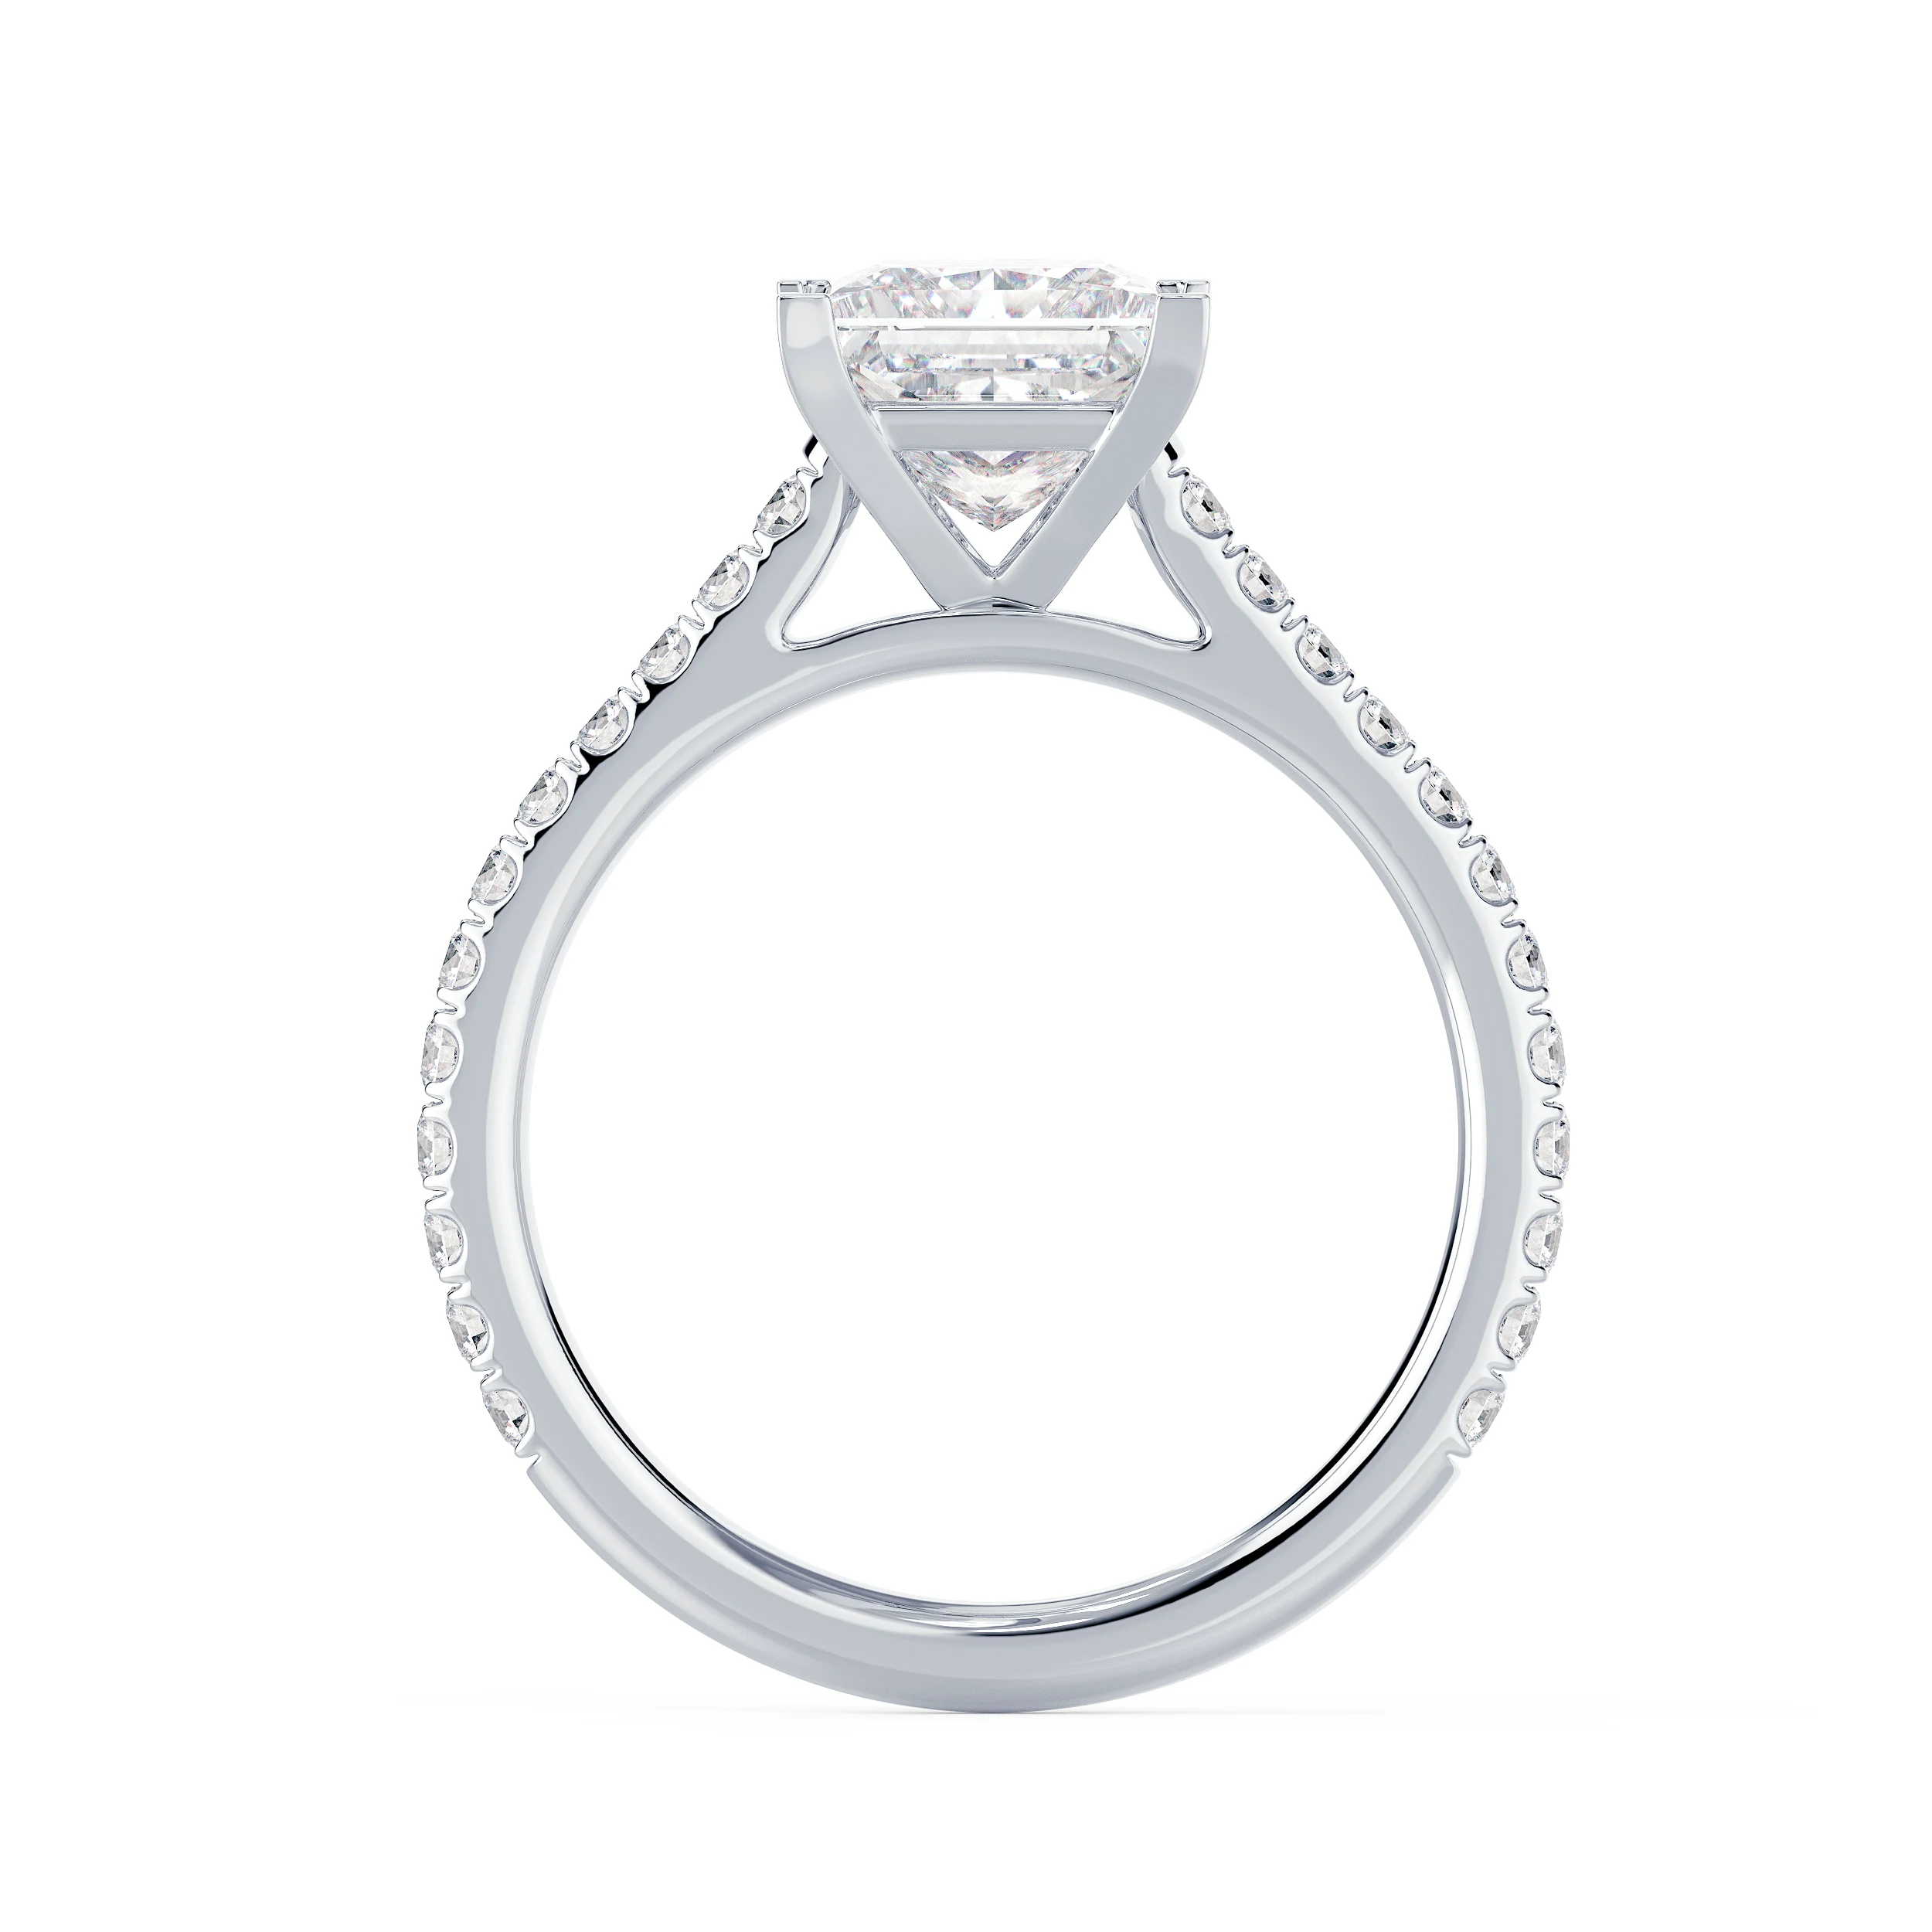 White Gold Princess Cathedral Pavé Setting featuring Synthetic Diamonds (Profile View)